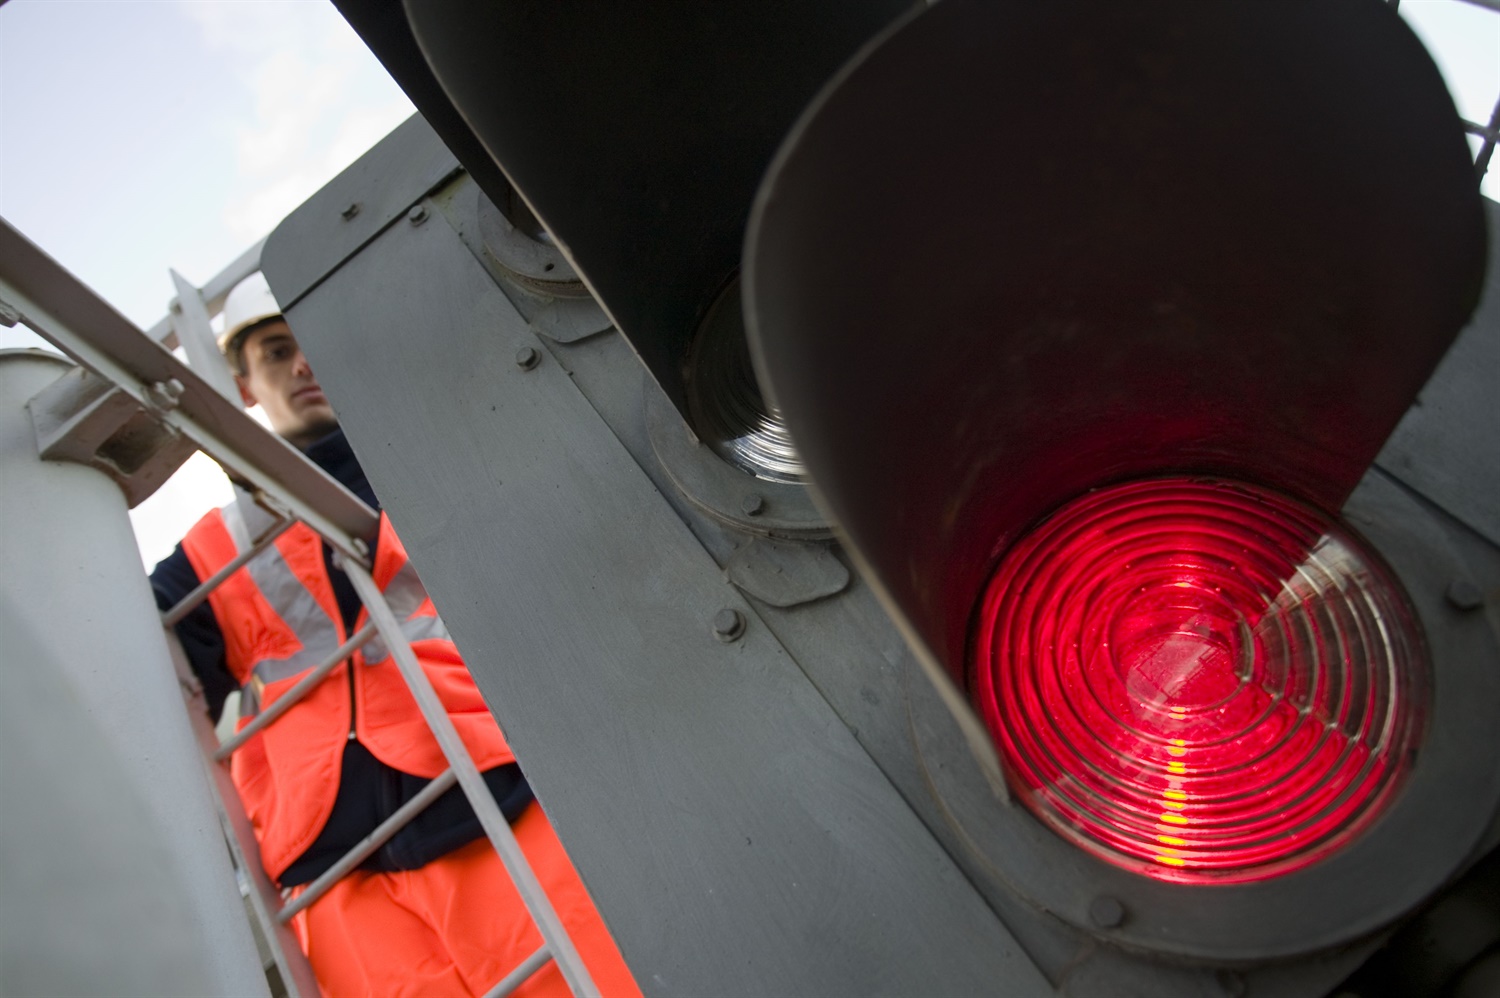 State-of-the-art signal work set to start in West Yorkshire